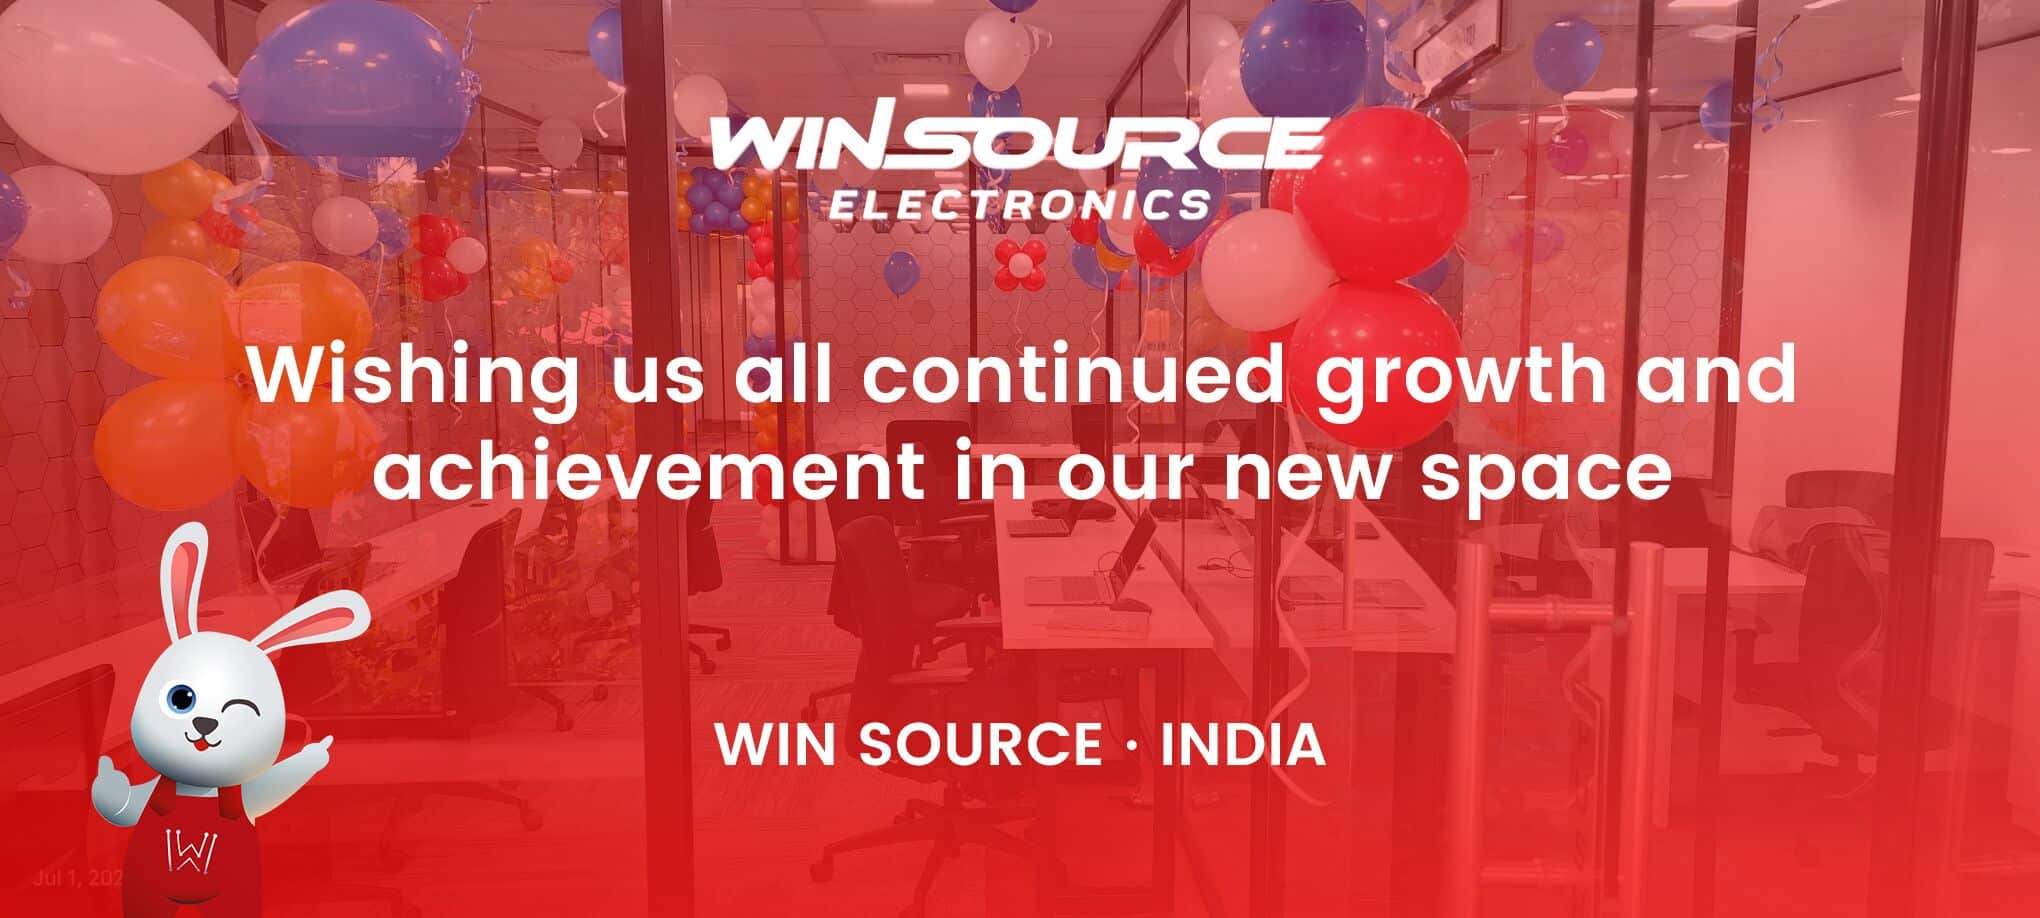 WIN SOURCE Establishes New Office in India